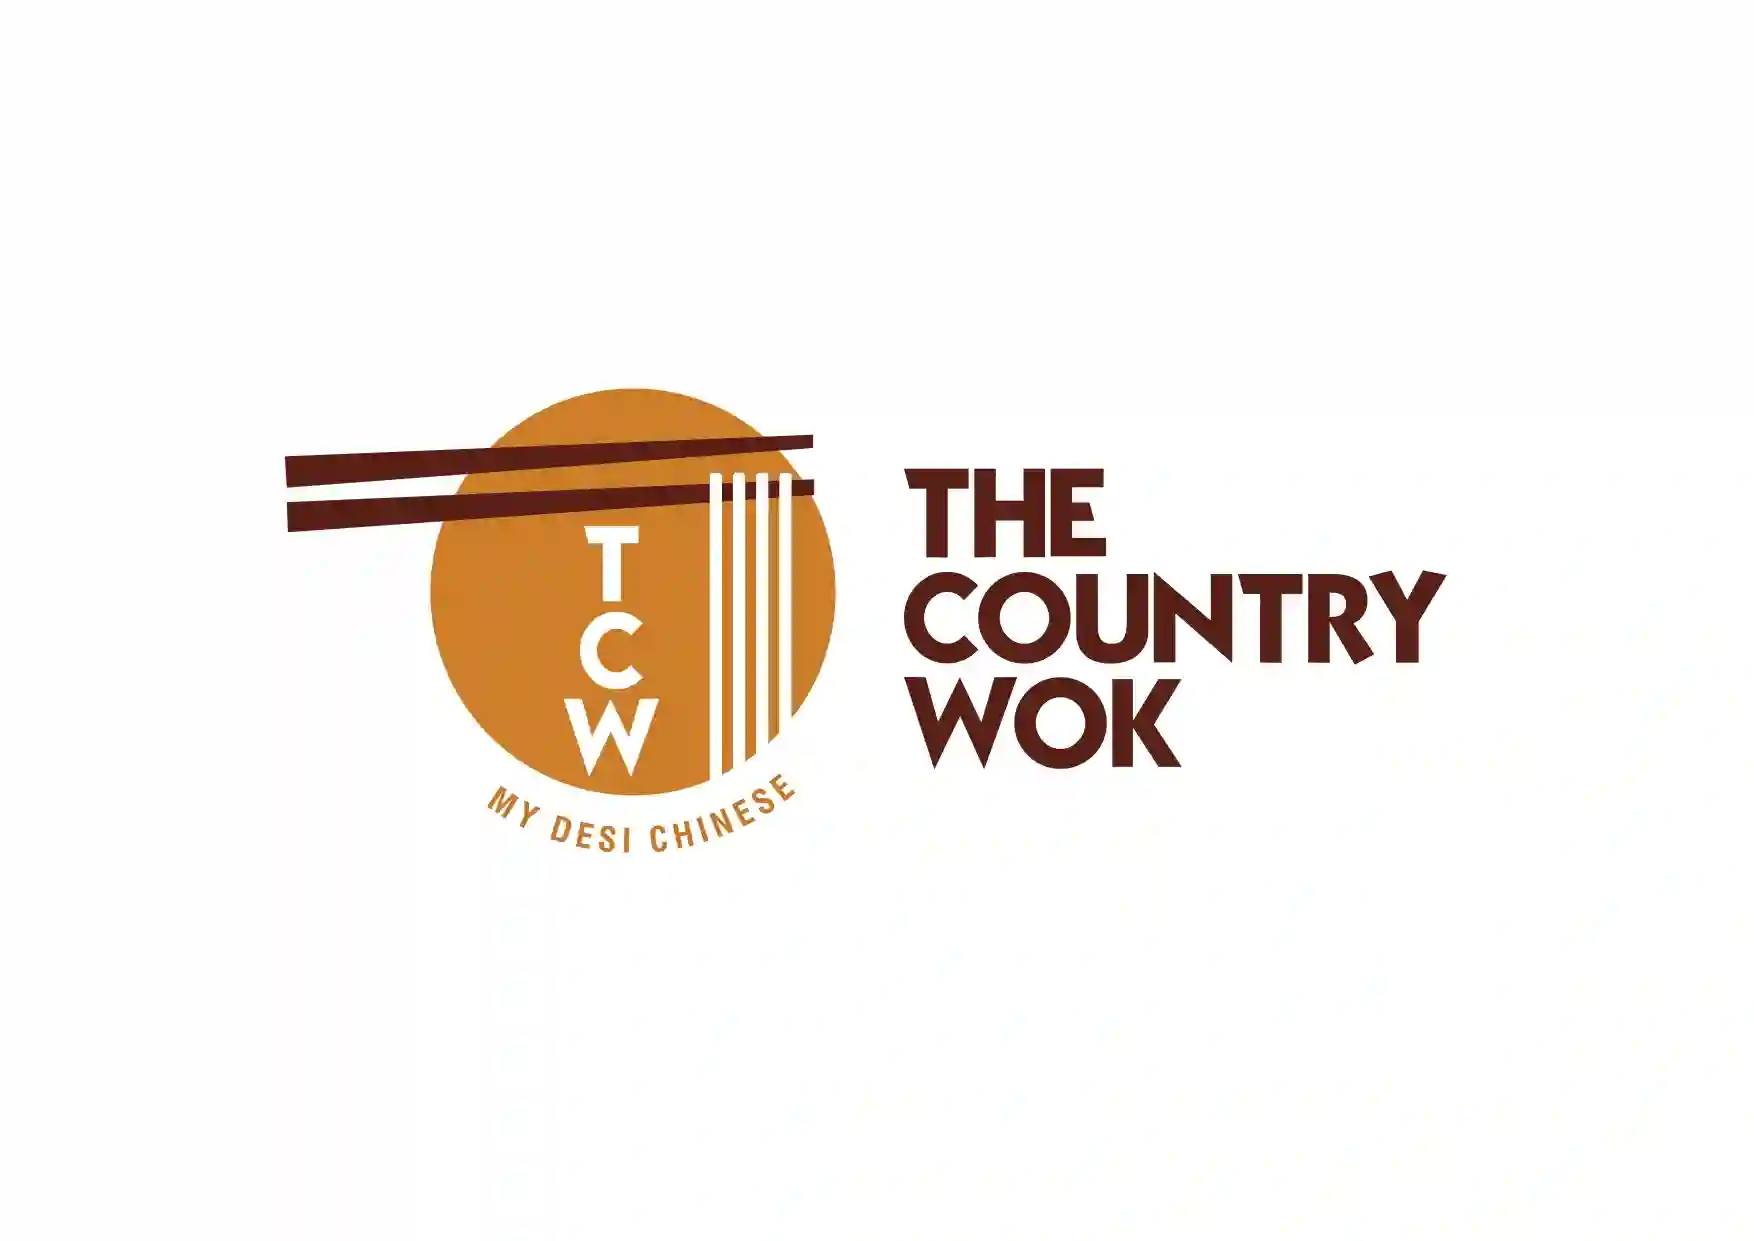 The country wok